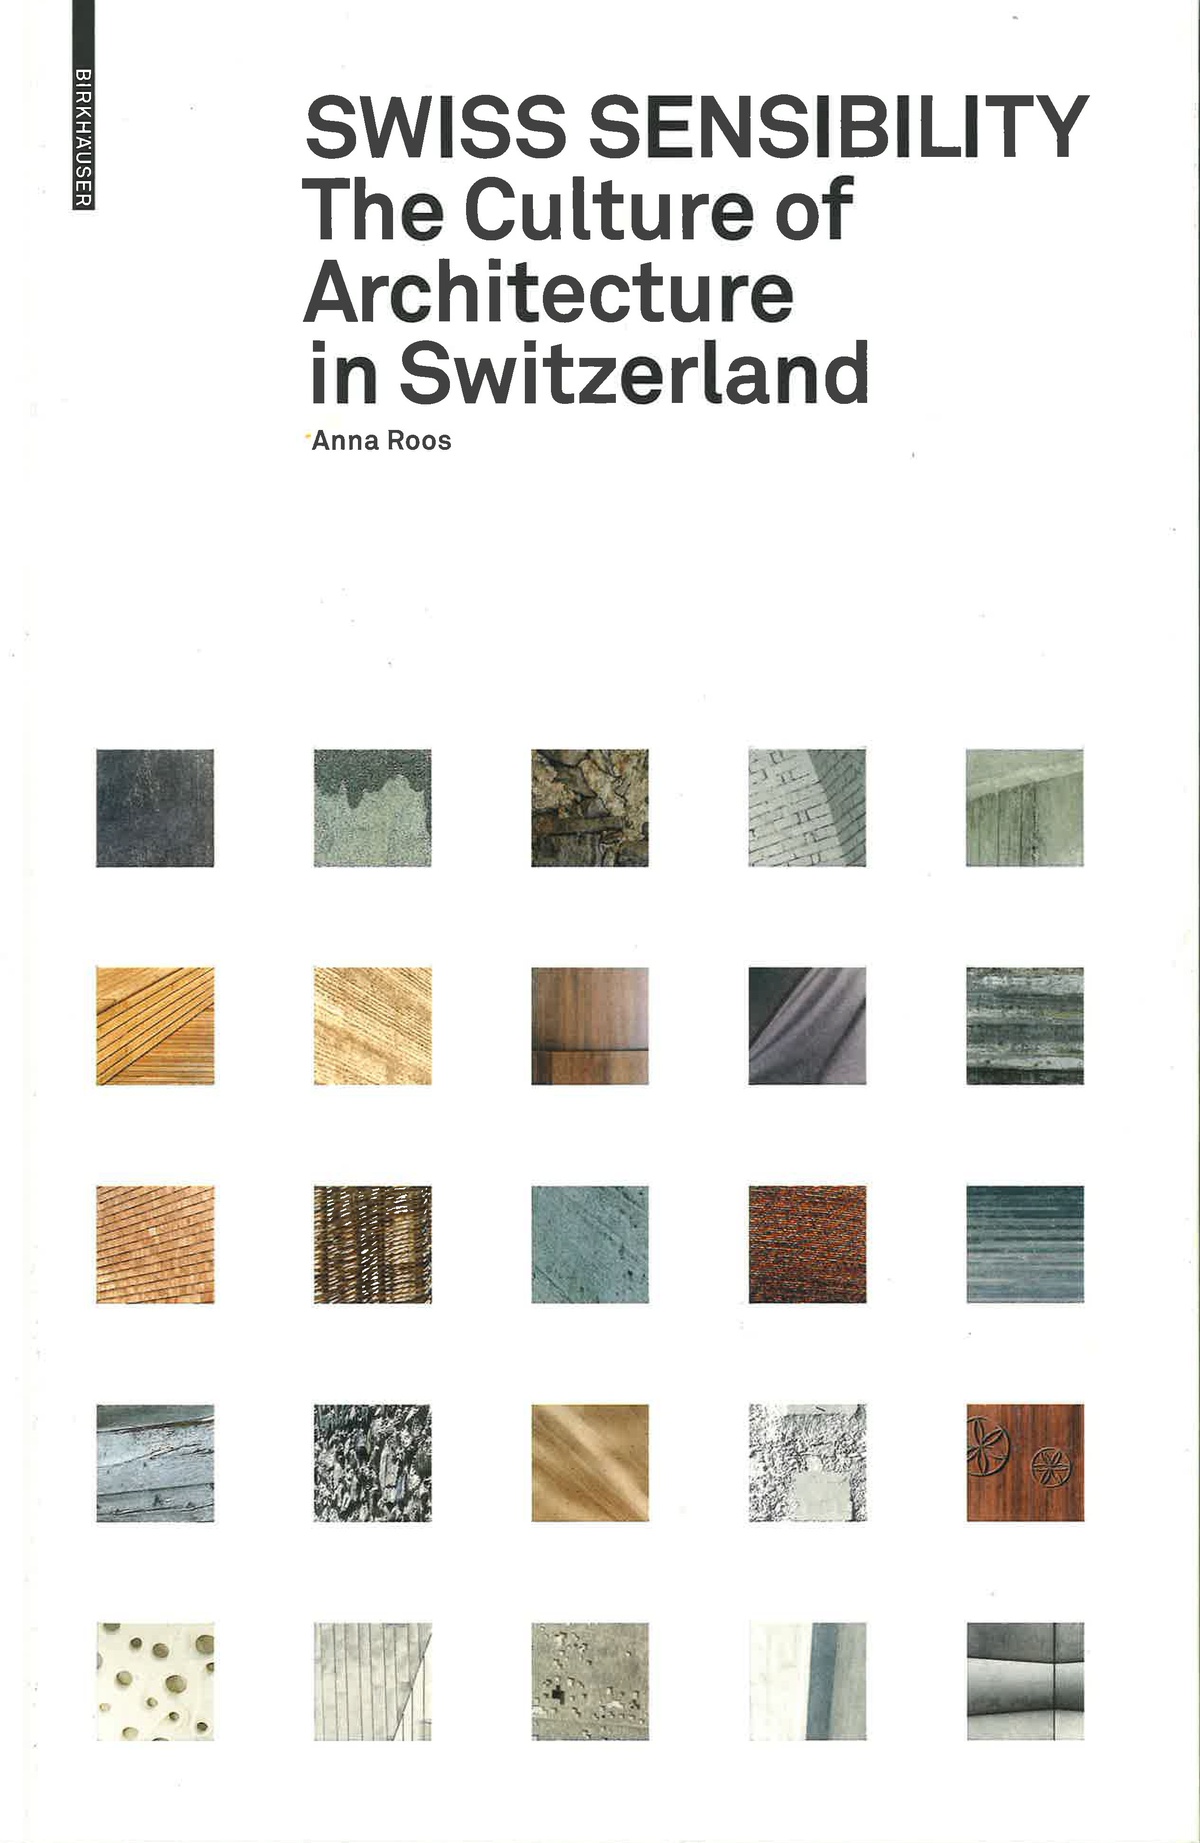 Swiss Sensibility. The Culture of Architecture in Switzerland